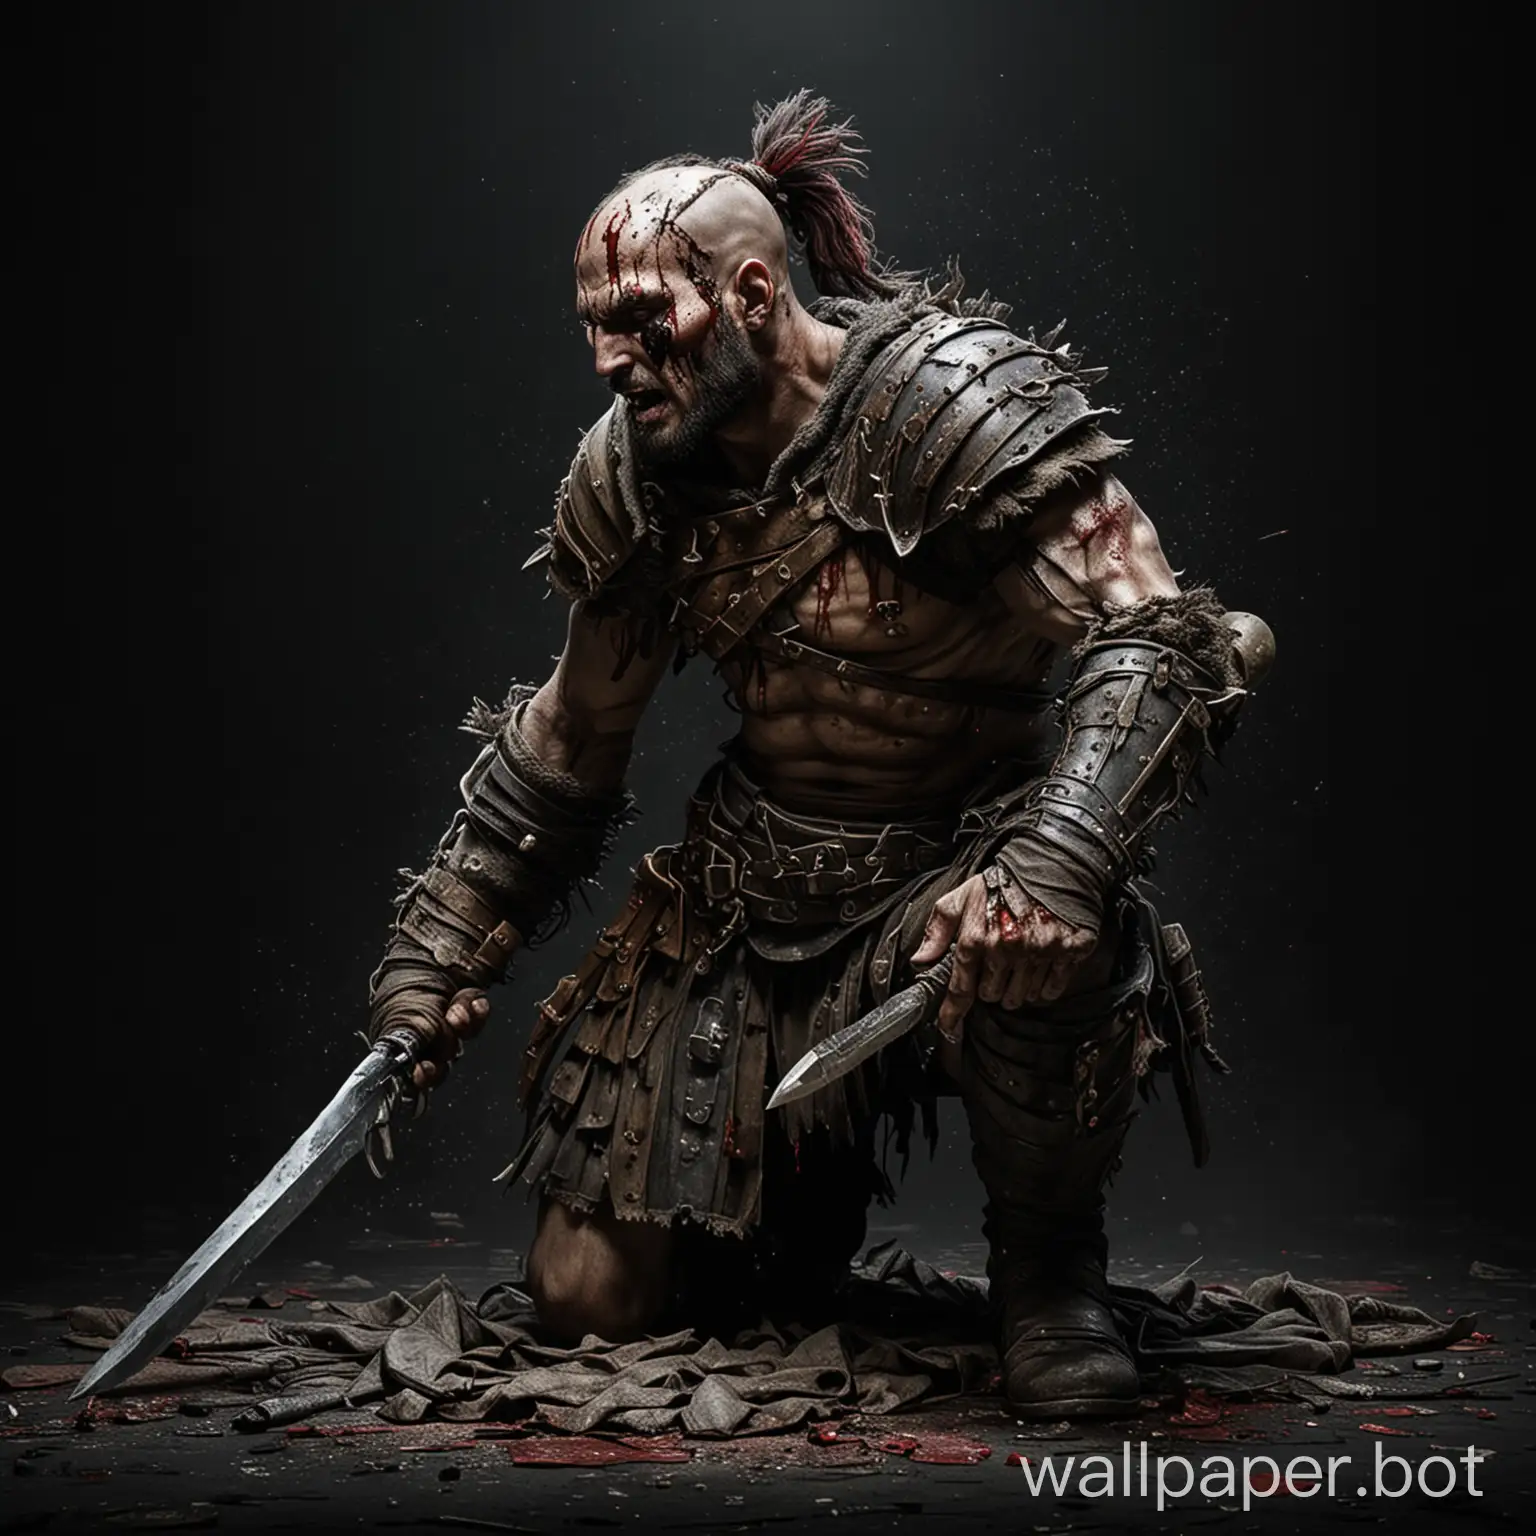 Draw a fantasy beaten wounded cowardly warrior on a black background